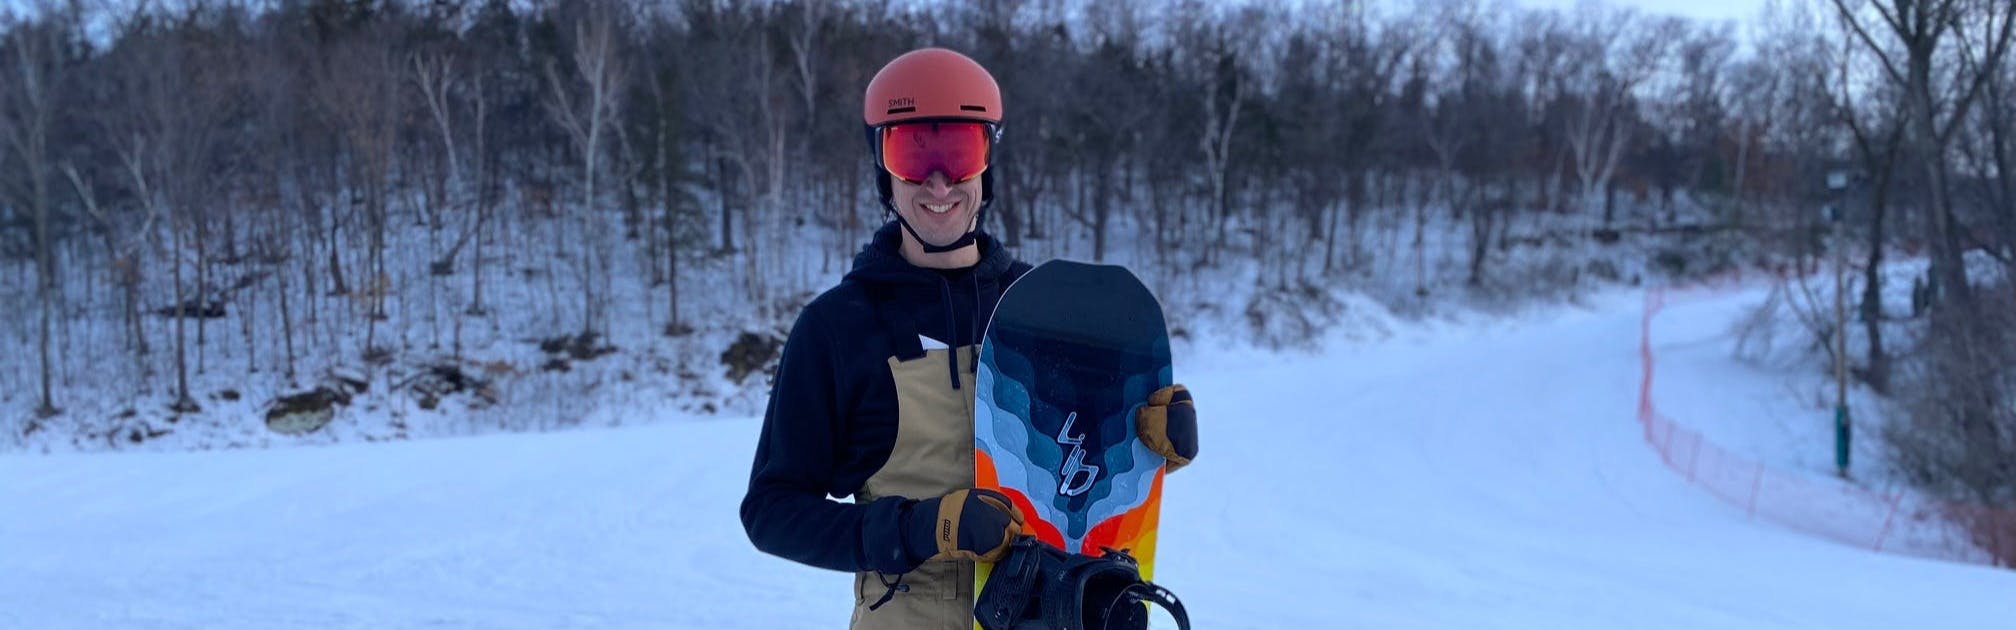 Man stands with a snowboard.